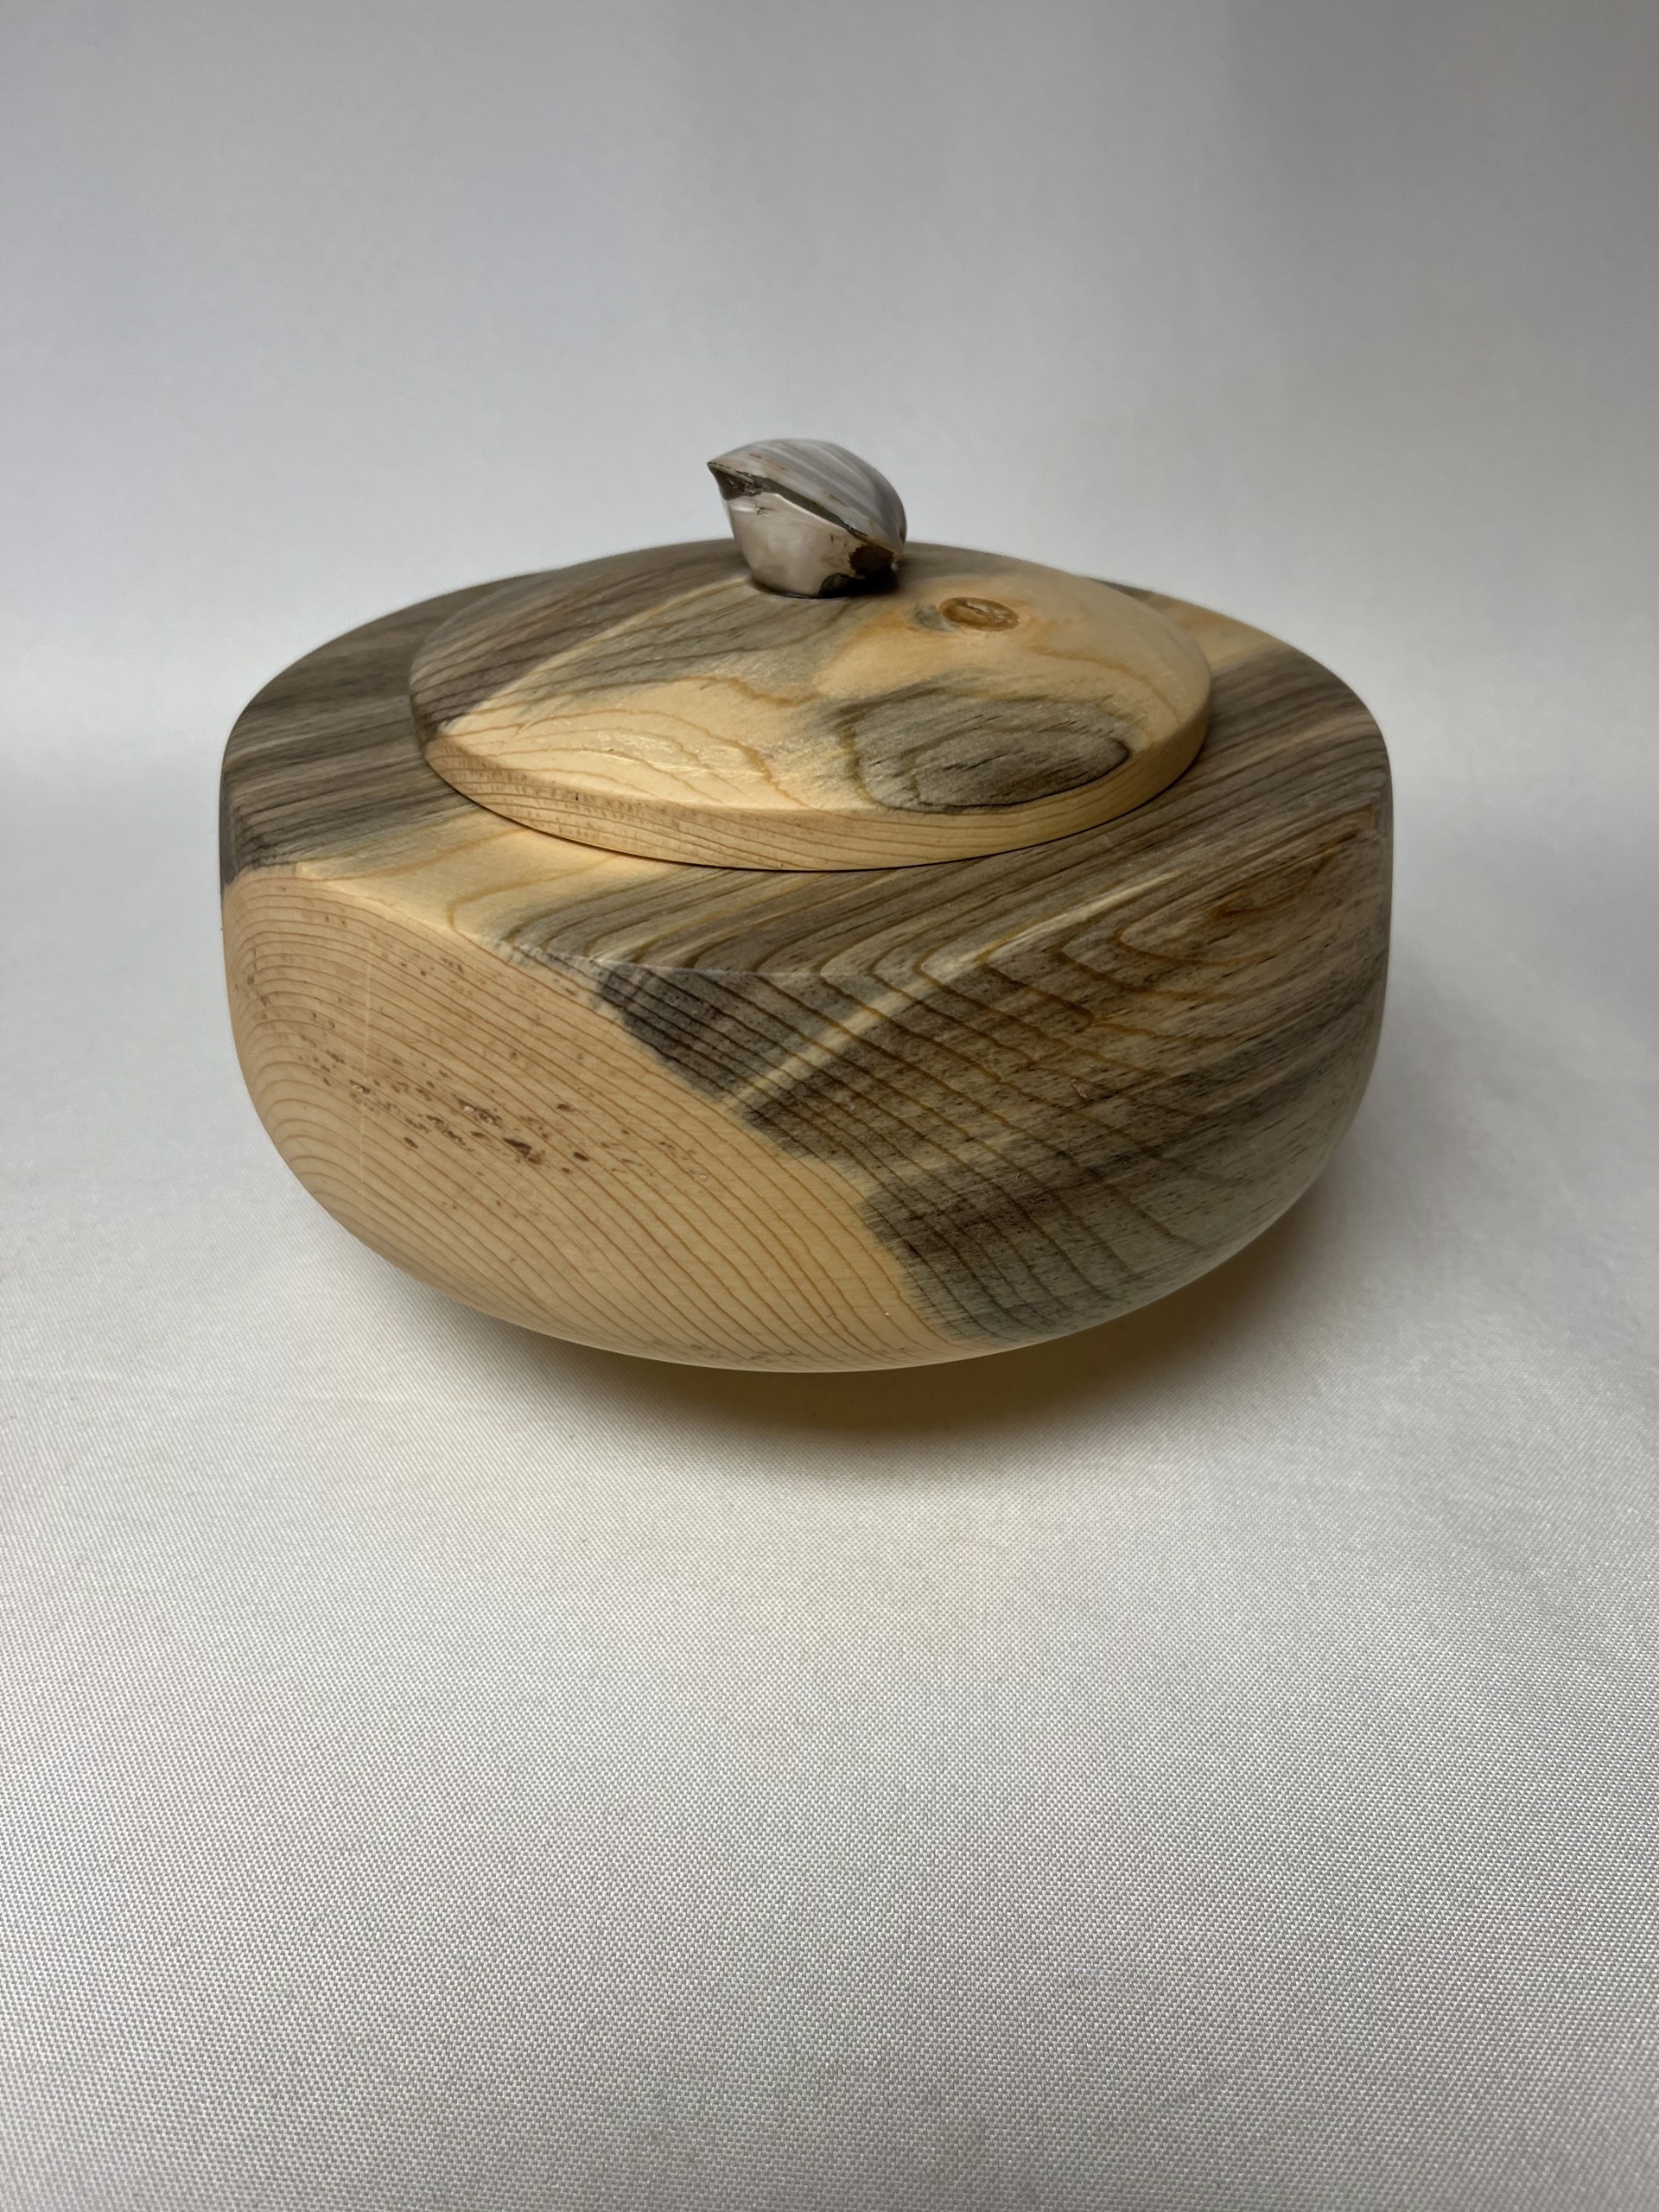 Turned Wood Jar W/Lid #22-4 by Rick Squires